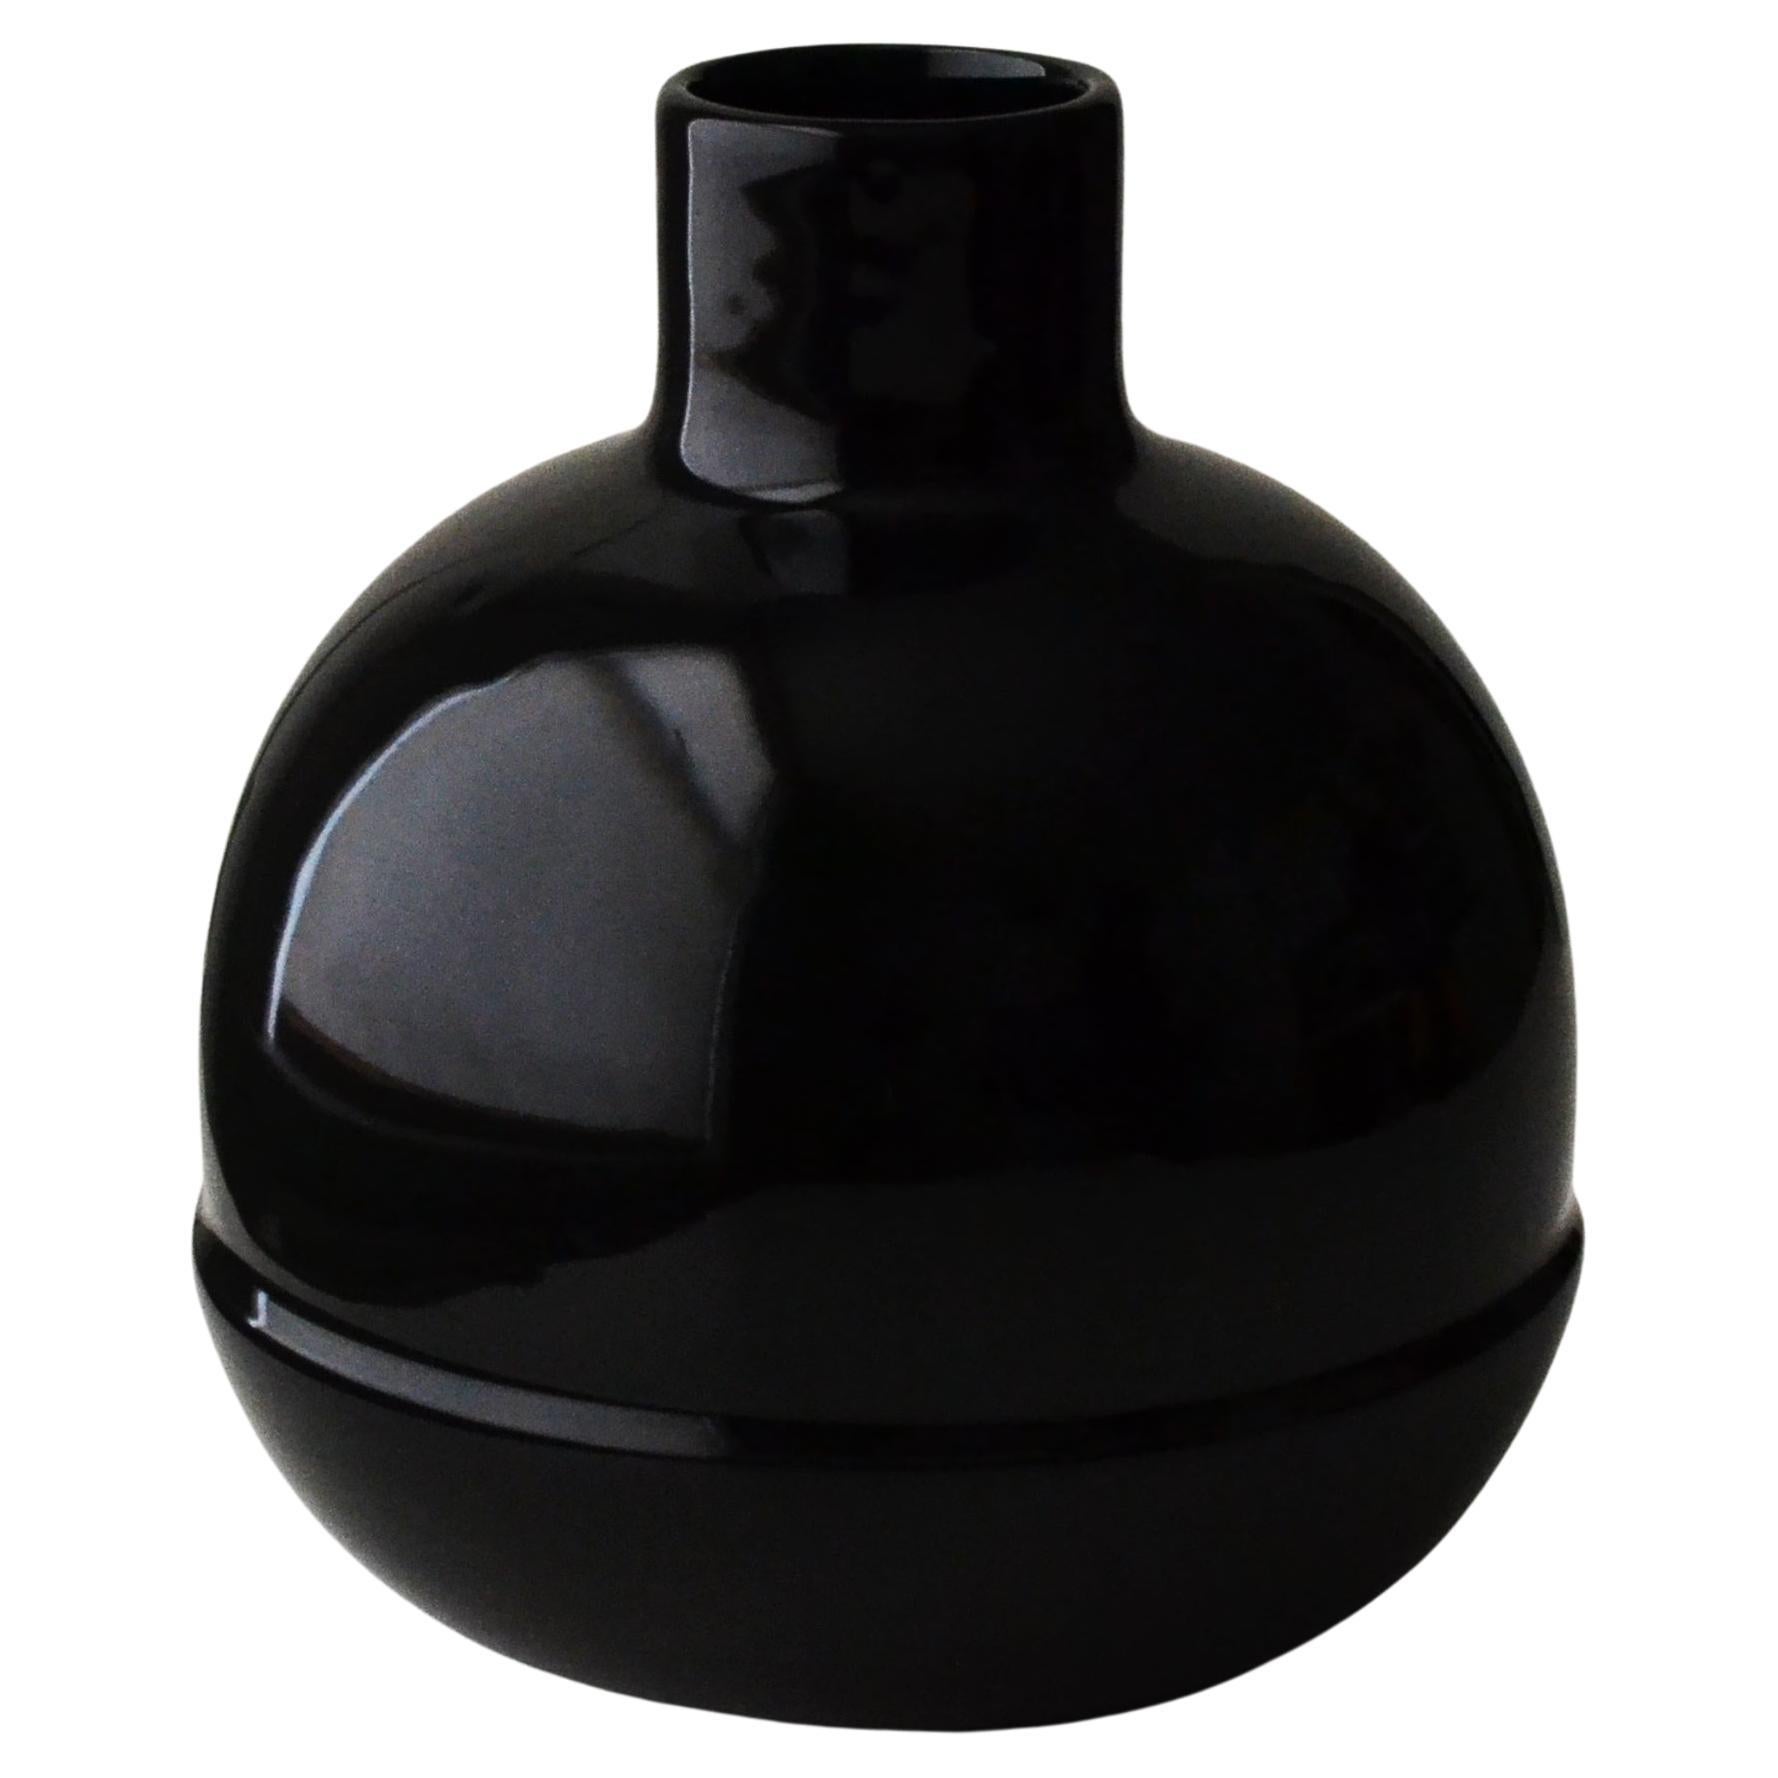 Special Edition Ceramic Carafe and cups bright shine black jug flower vase Large For Sale